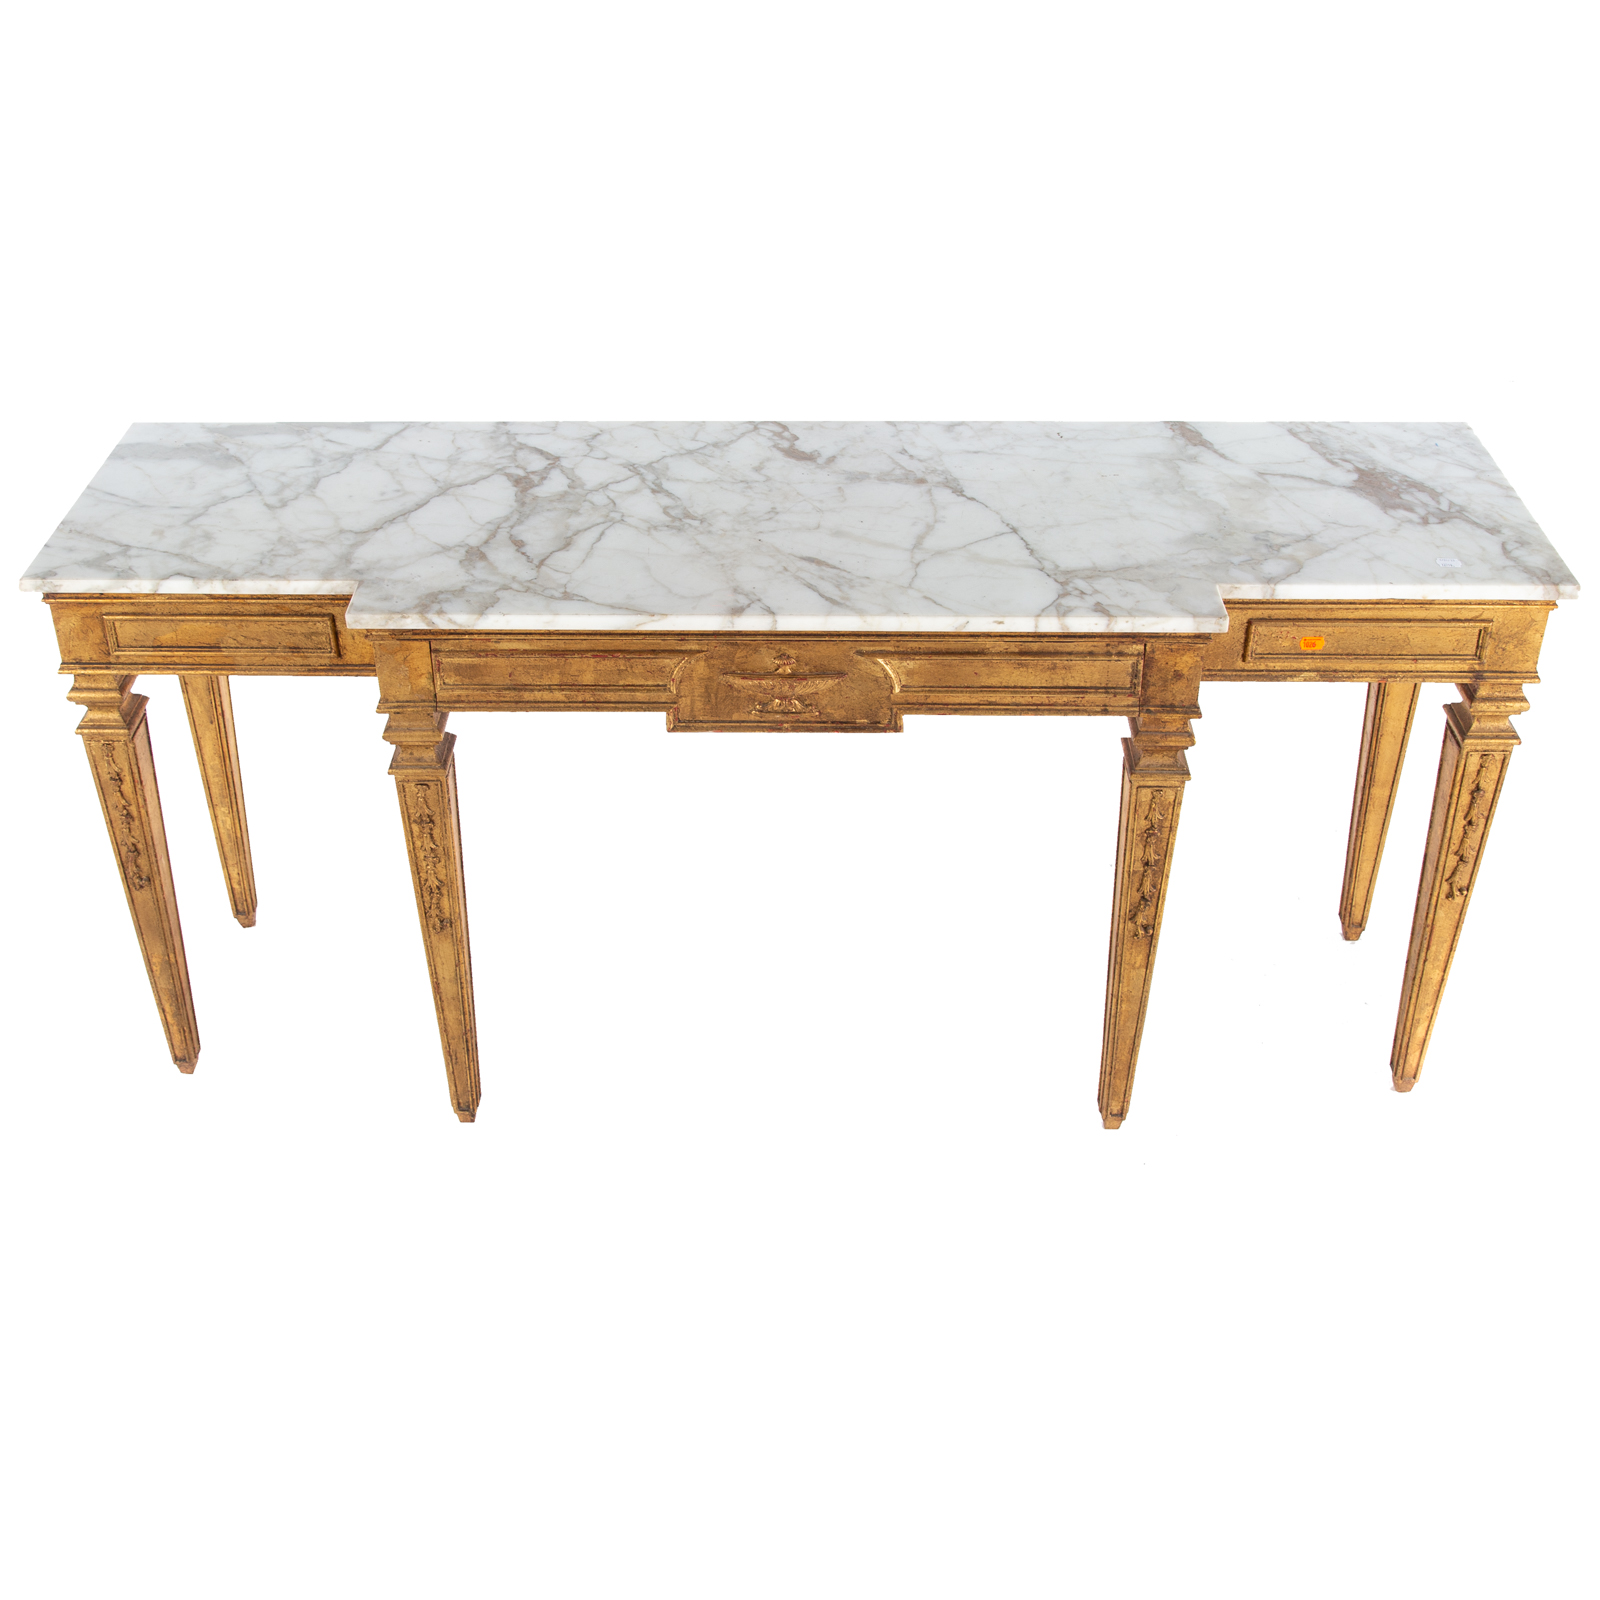 FRENCH GILTWOOD MARBLE TOP CONSOLE 3b28d1